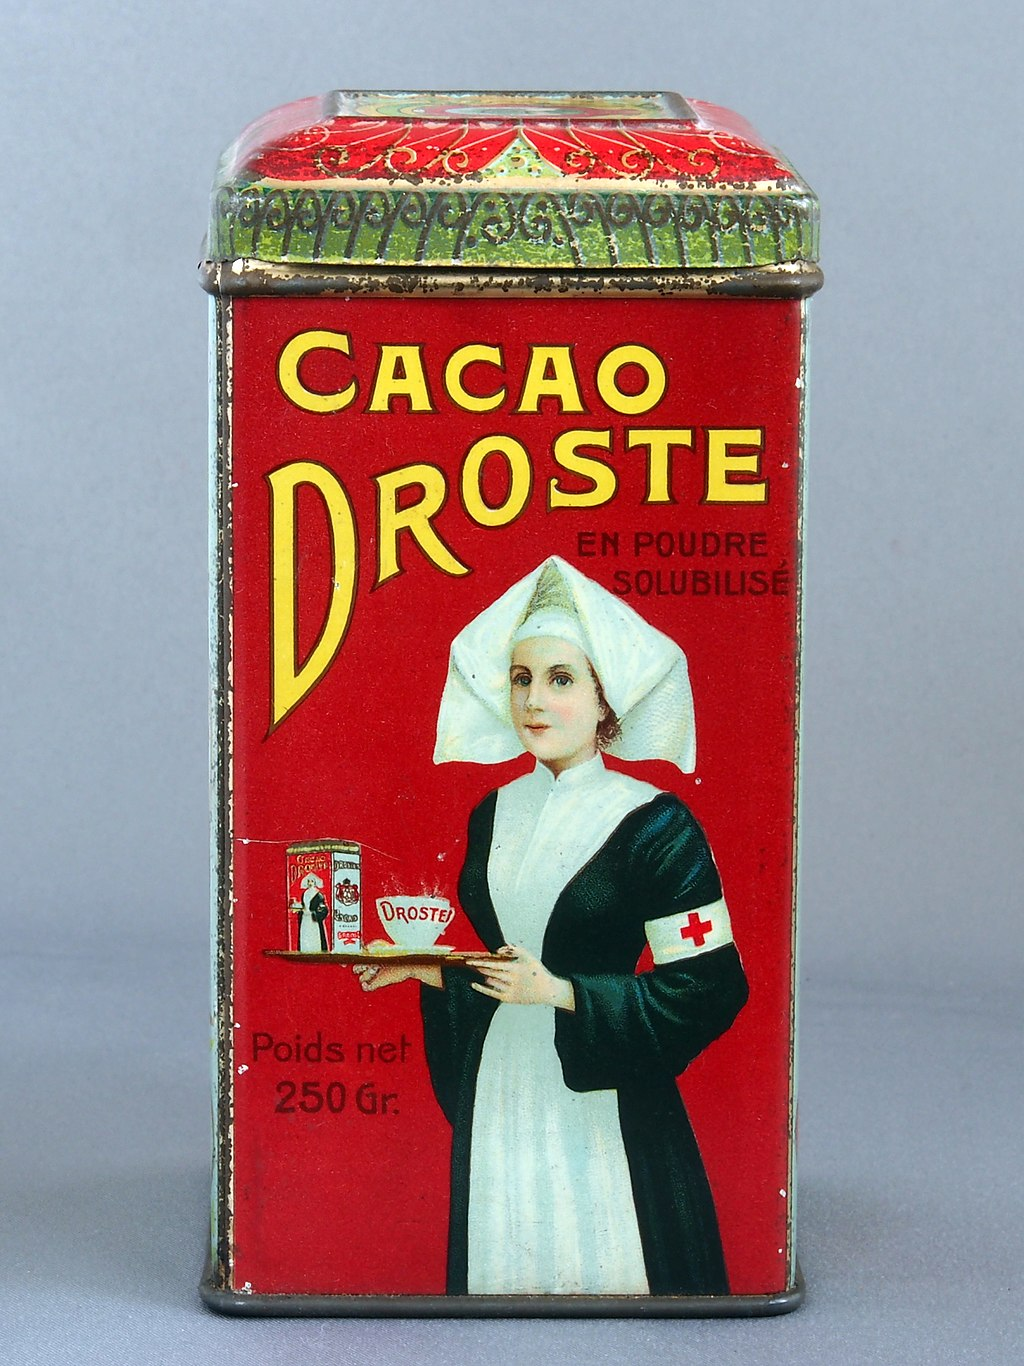 The original 1904 Droste cocoa tin, designed by Jan Musset (1861–1931) (Wikipedia)